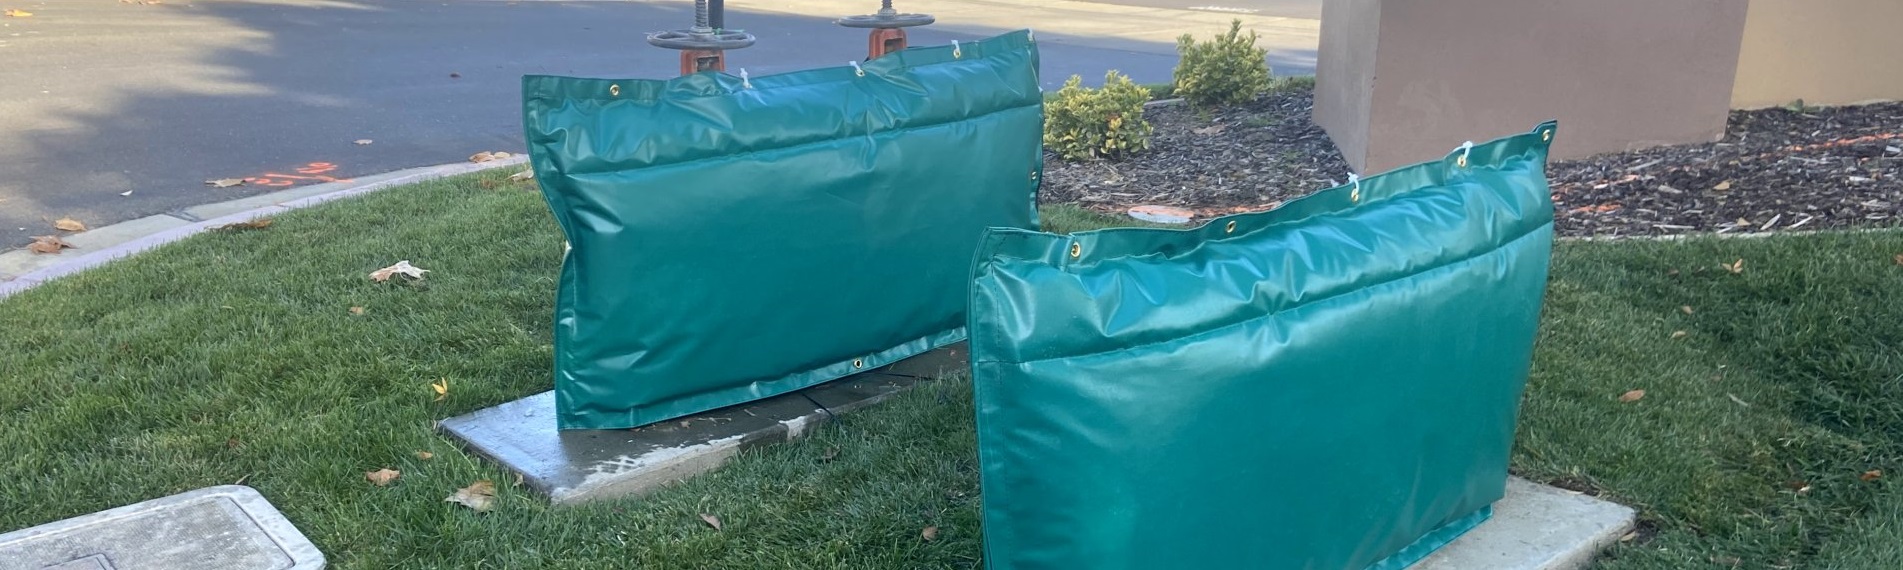 backflow cover backflow freeze bag A1 Freeze Bag - Backflow Covers Insulated Covers Freeze Bags Backflow Bags Fire Wraps - Backflow Cover  Bags - Custom Freeze Bags and Backflow bag Installation Placer County Sacramento CA Lincoln Rocklin Roseville